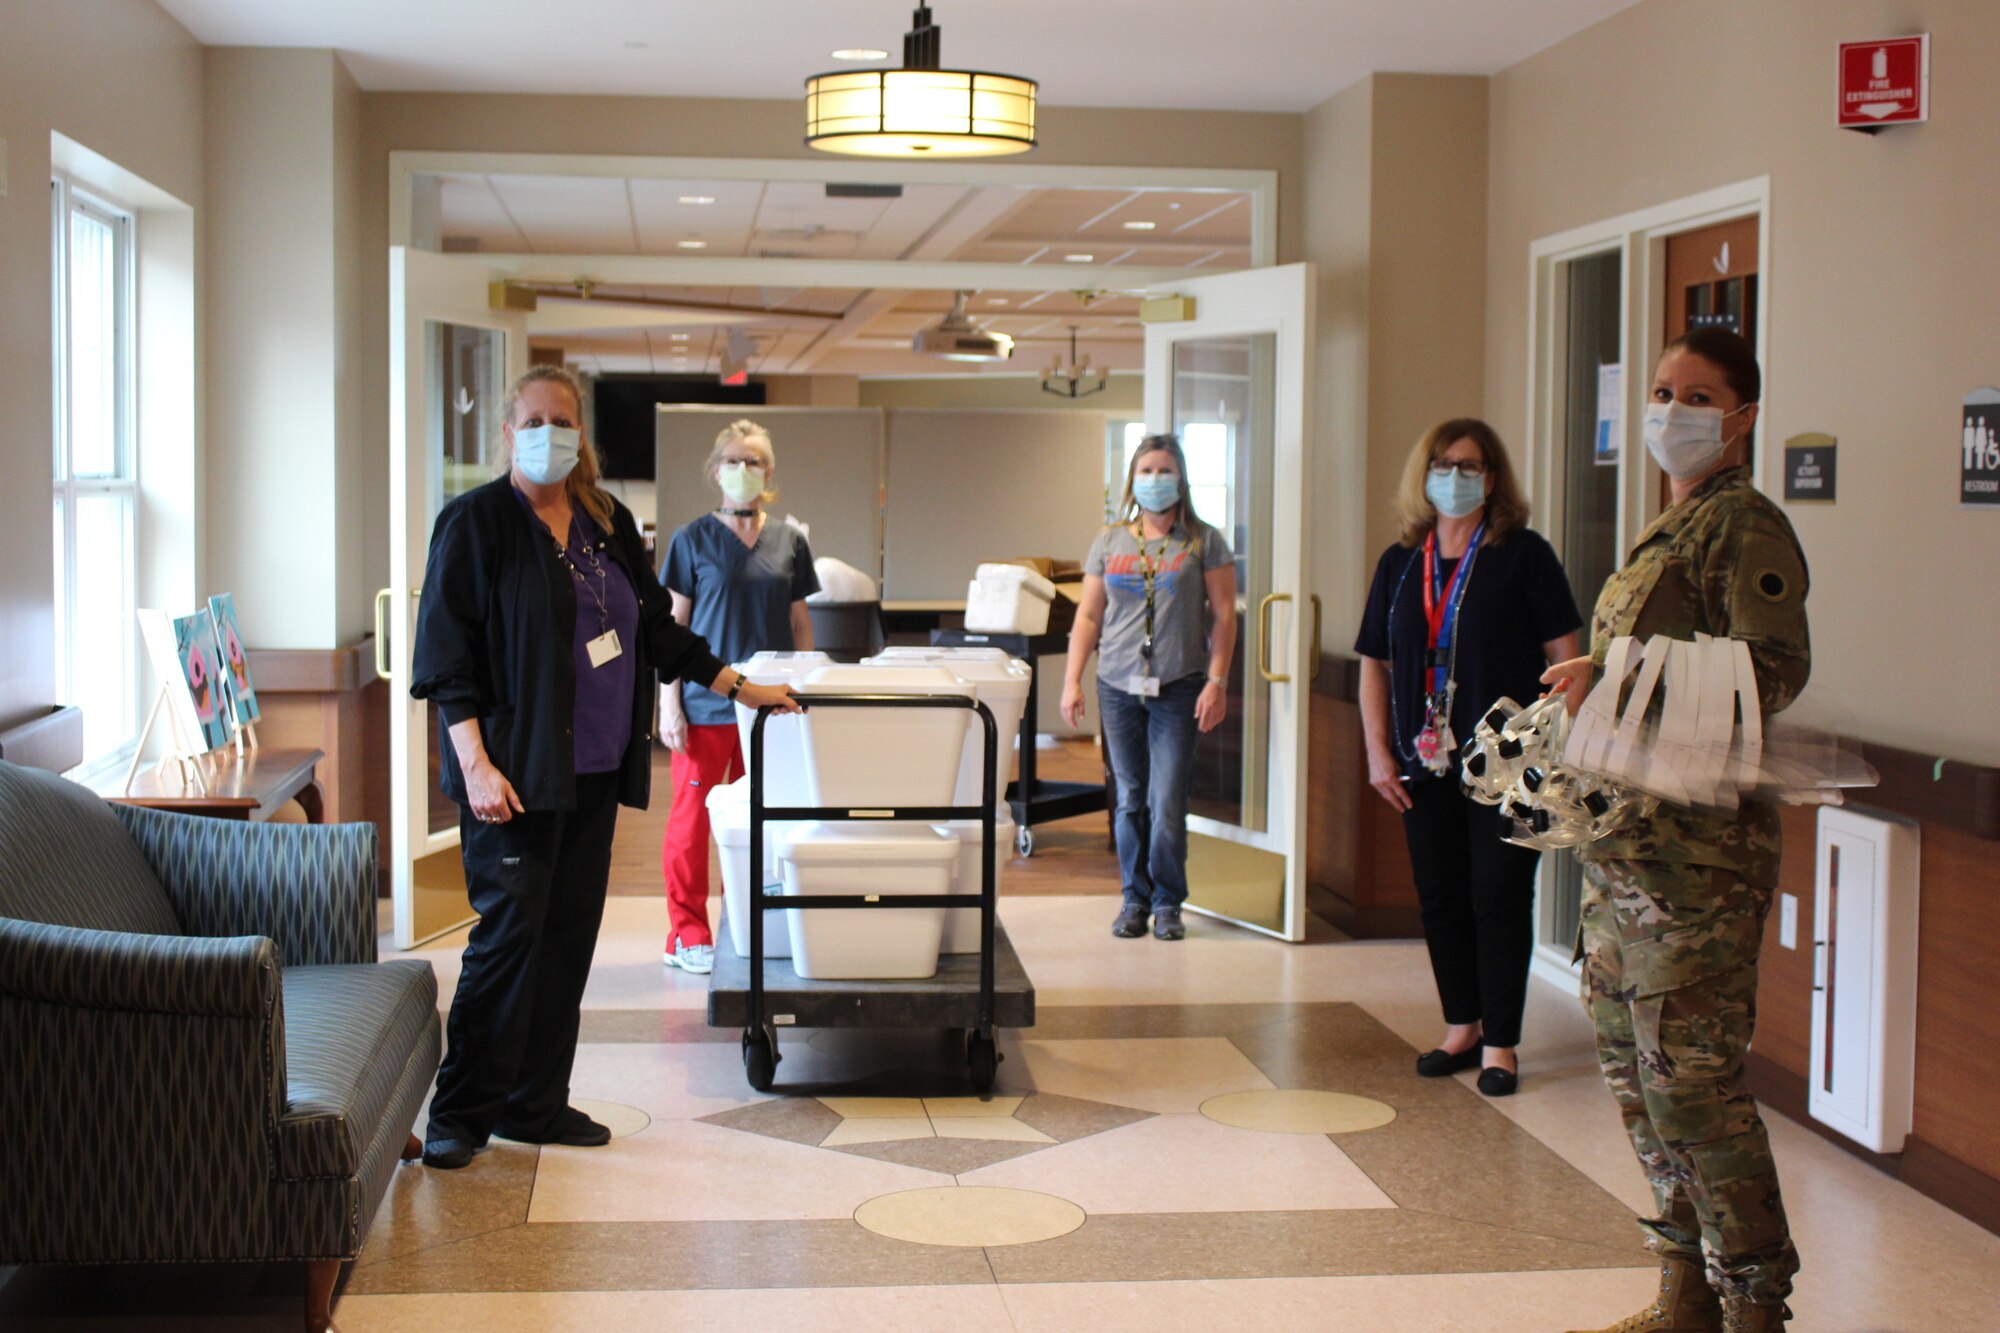 Maj. Jessica Taylor (right), commander of Company C, 237th Support Battalion, provides a supply of personal protective equipment to staff at the Ohio Veterans Home in Georgetown, Ohio. Taylor recently led a team of Ohio National Guard medical personnel that conducted COVID-19 testing at the facility, collecting samples from more than 200 staff members and approximately 140 resident veterans. (Photo courtesy of Ohio Department of Veterans Services)